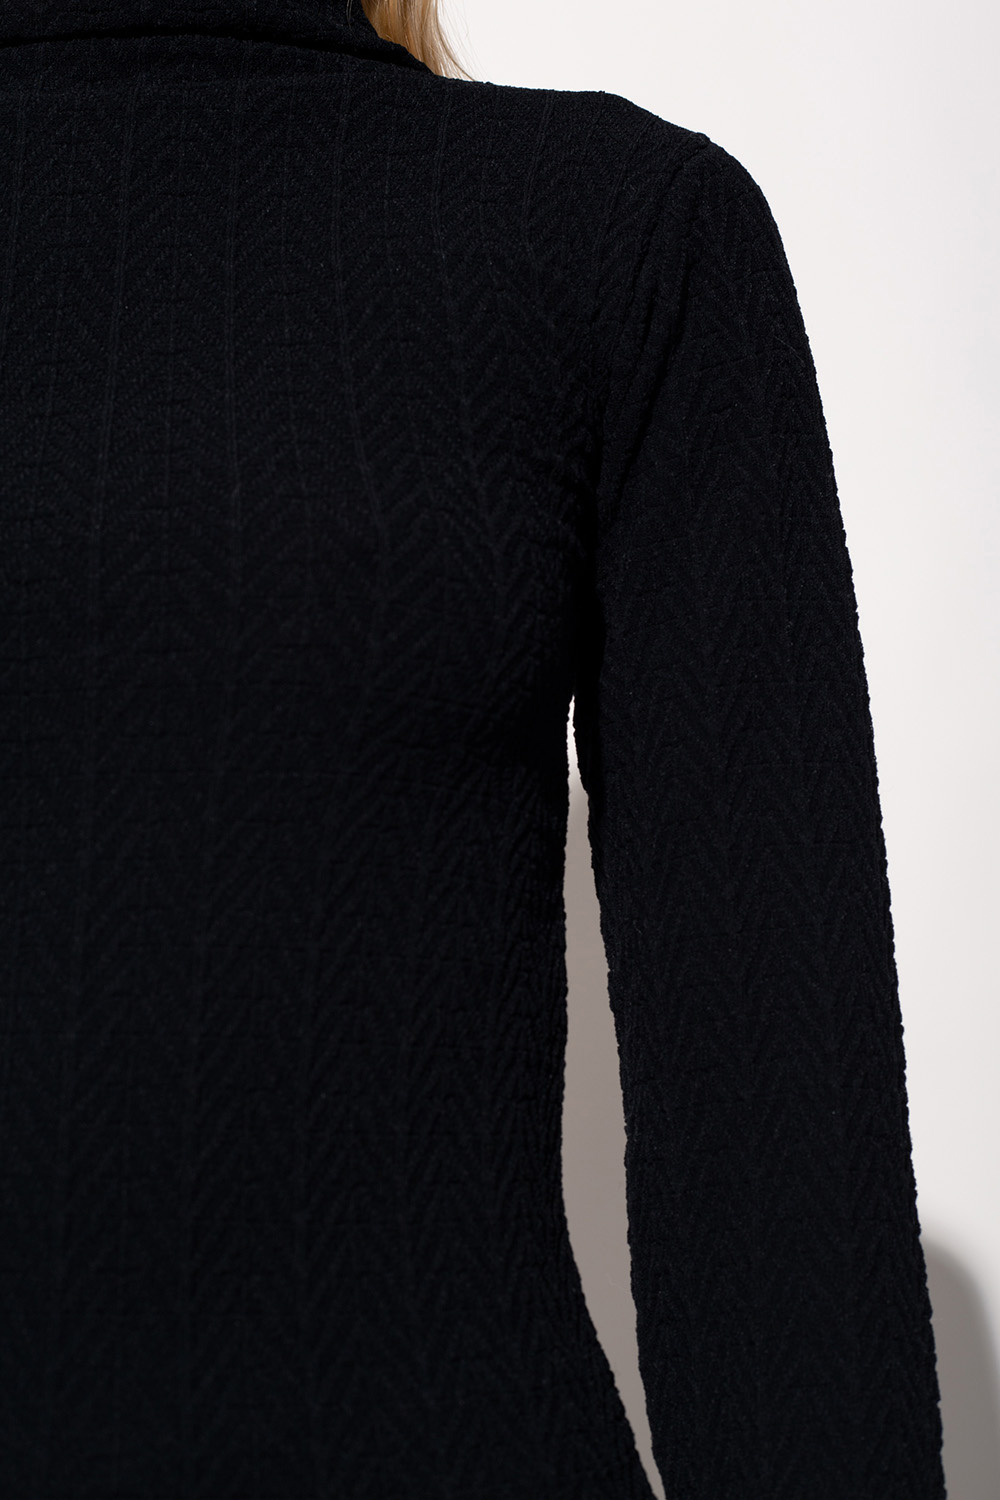 Aeron Sweater with stand-up collar